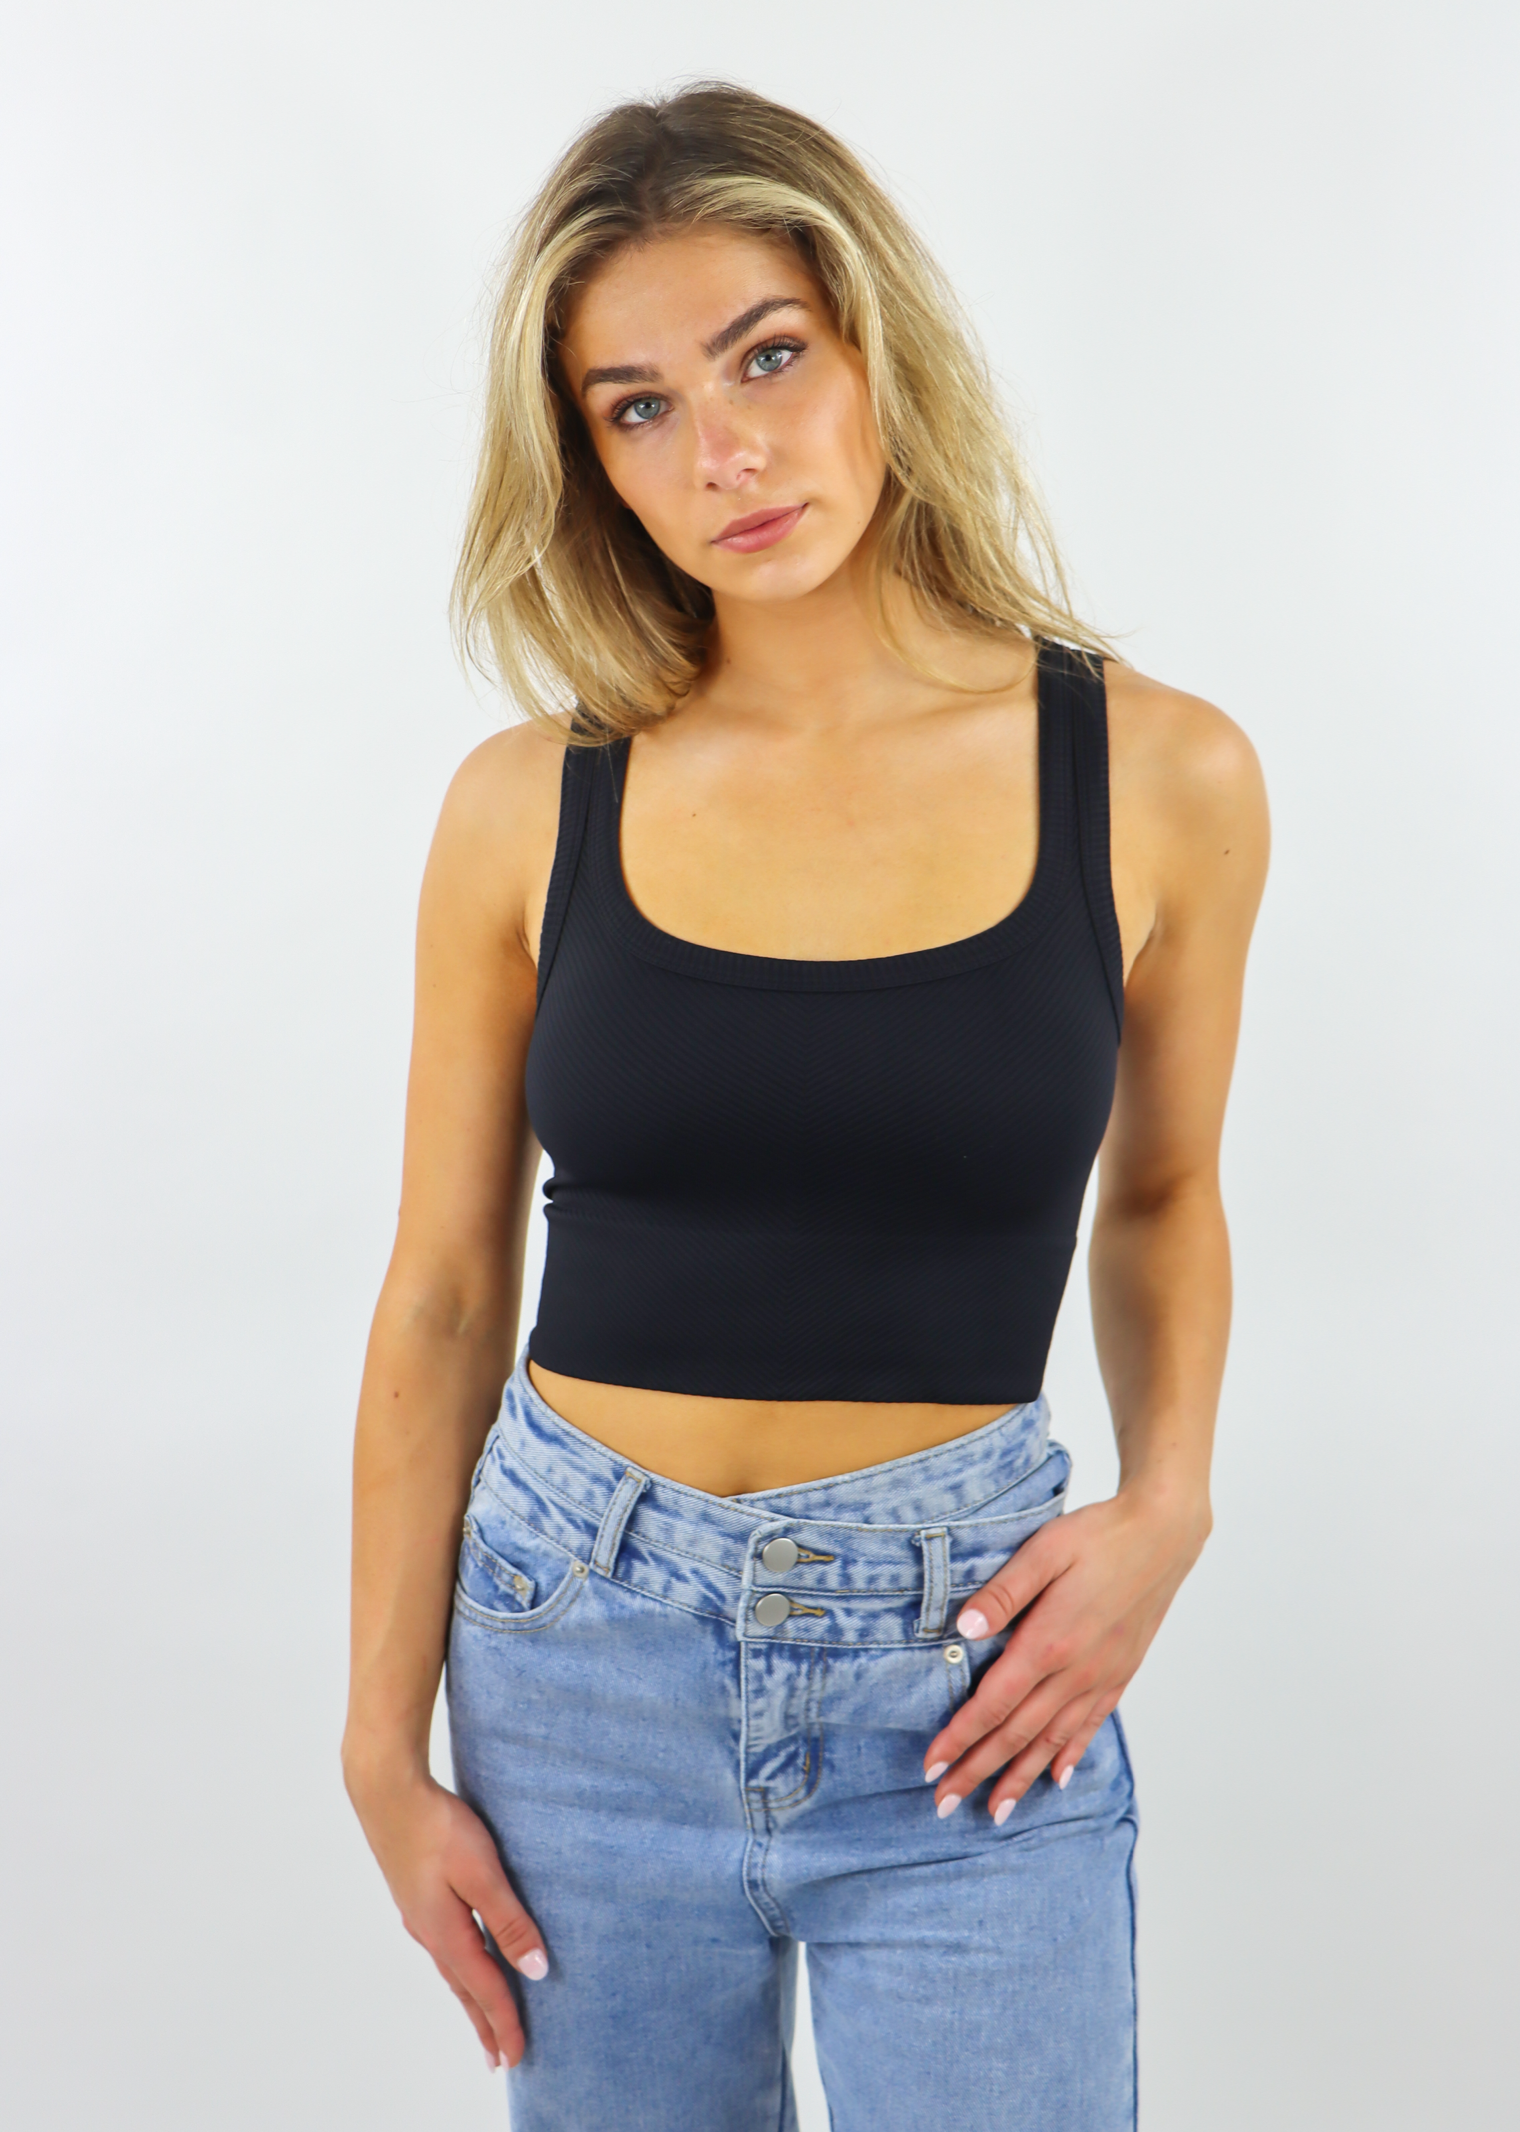 Express Women's Ribbed Square Neck Crop Top